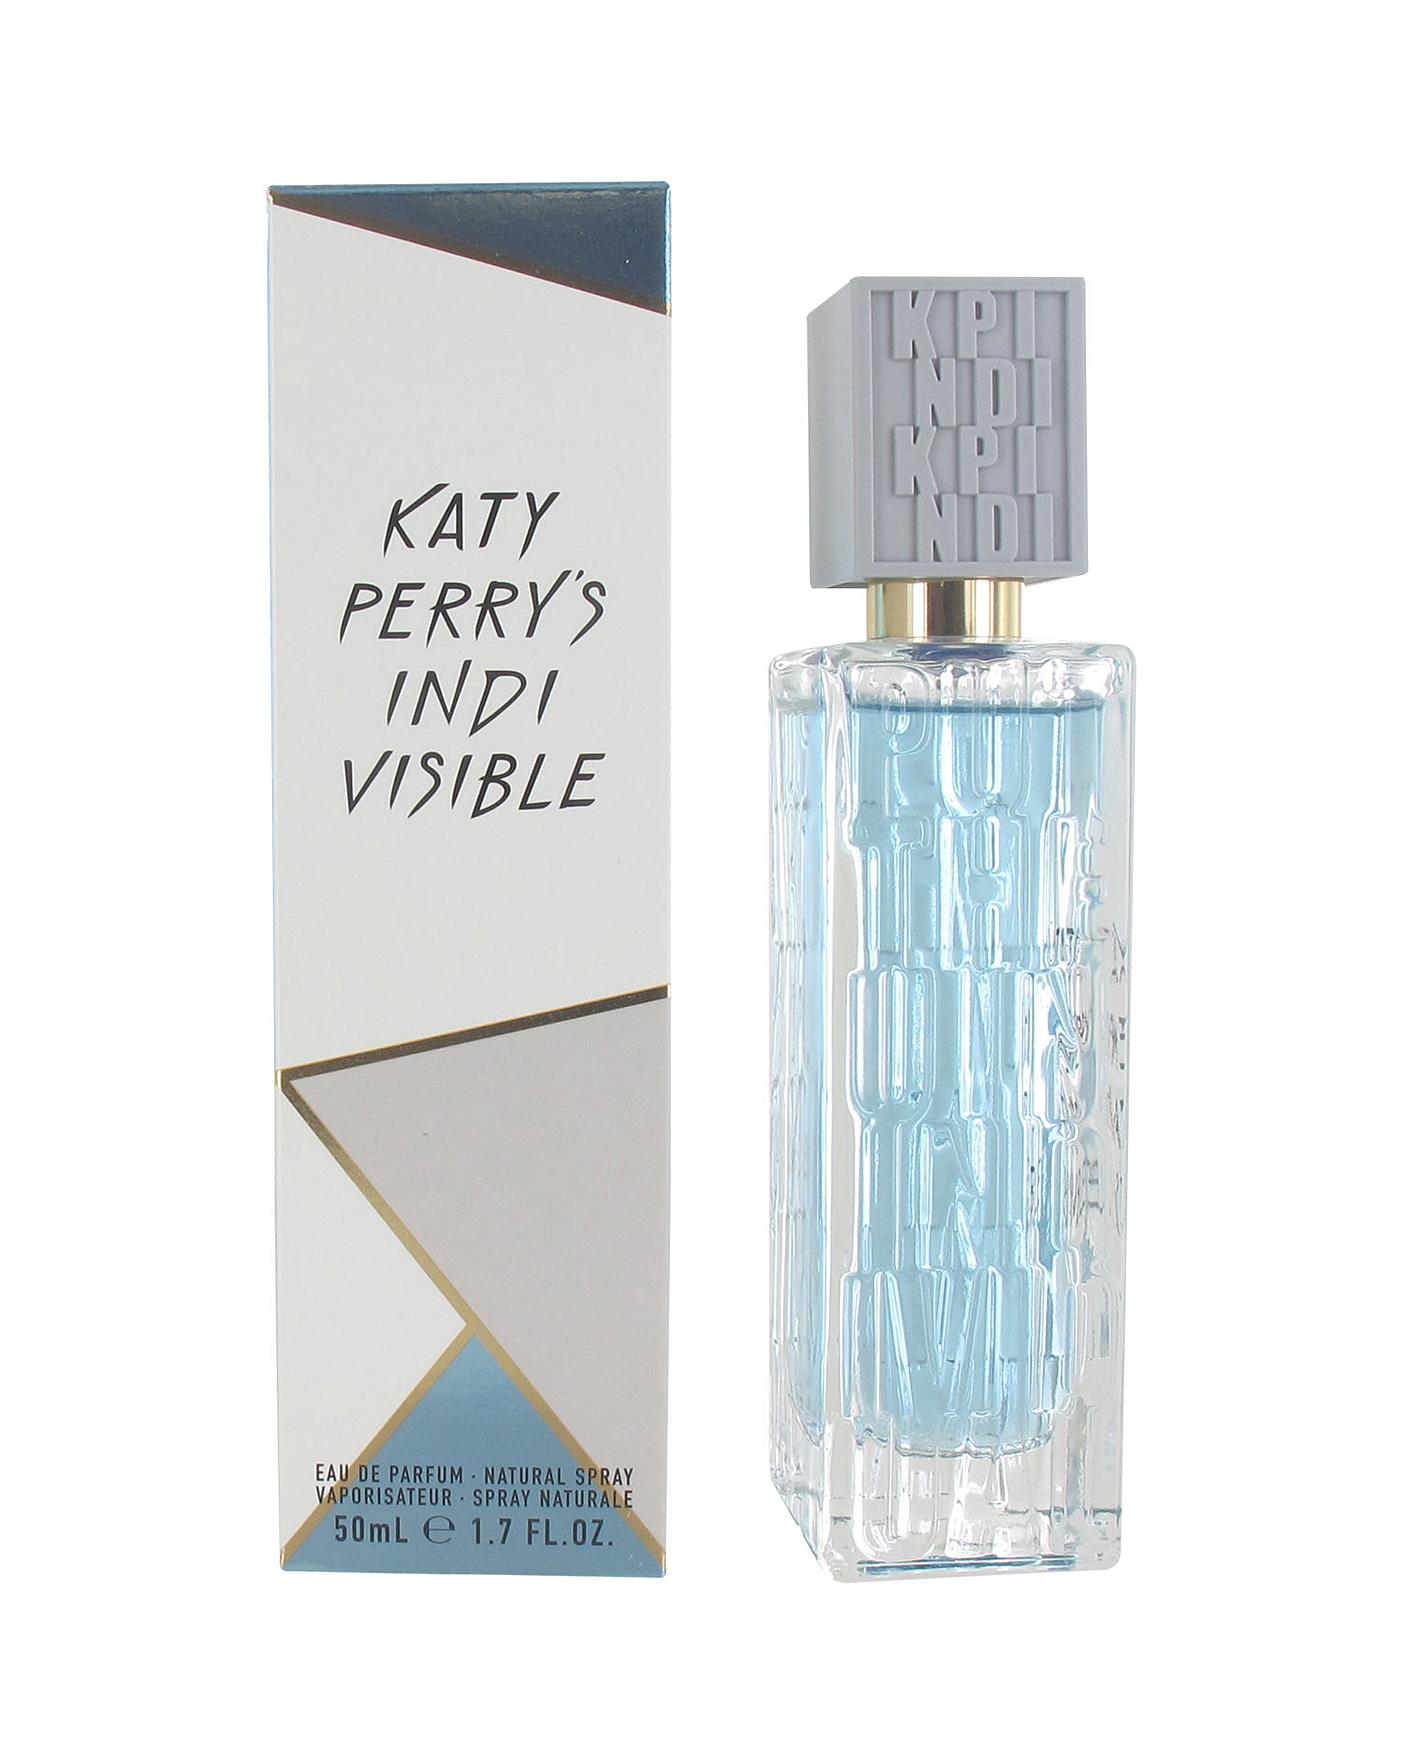 Katy Perry Indi Visible 50ml EDP Spray | Home Essentials